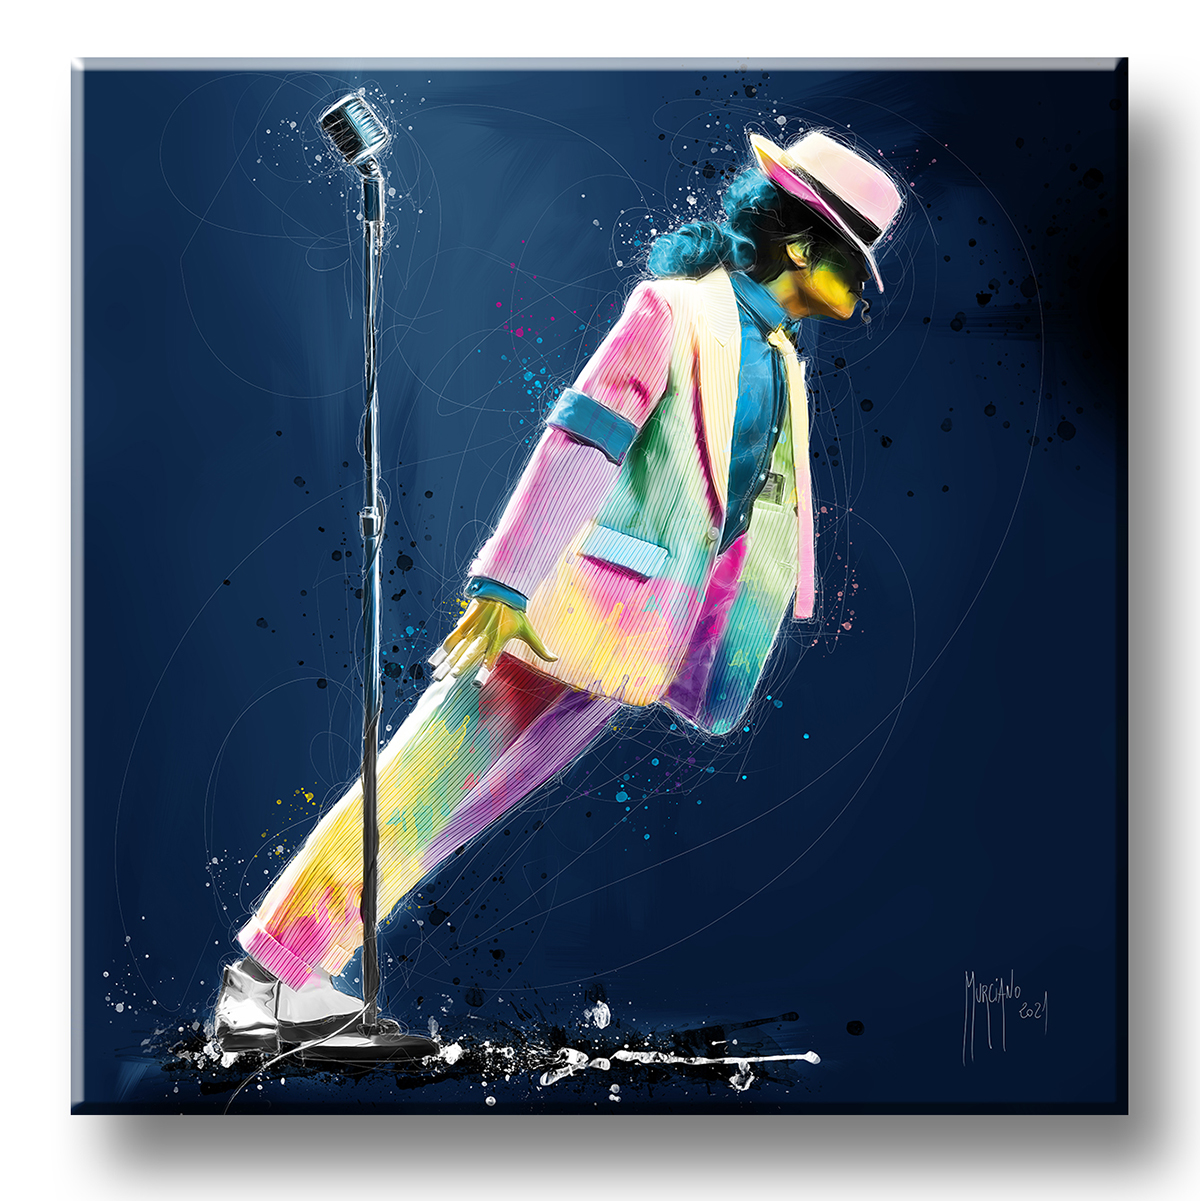 MJ SMOOTH CRIMINAL – Collection ICE